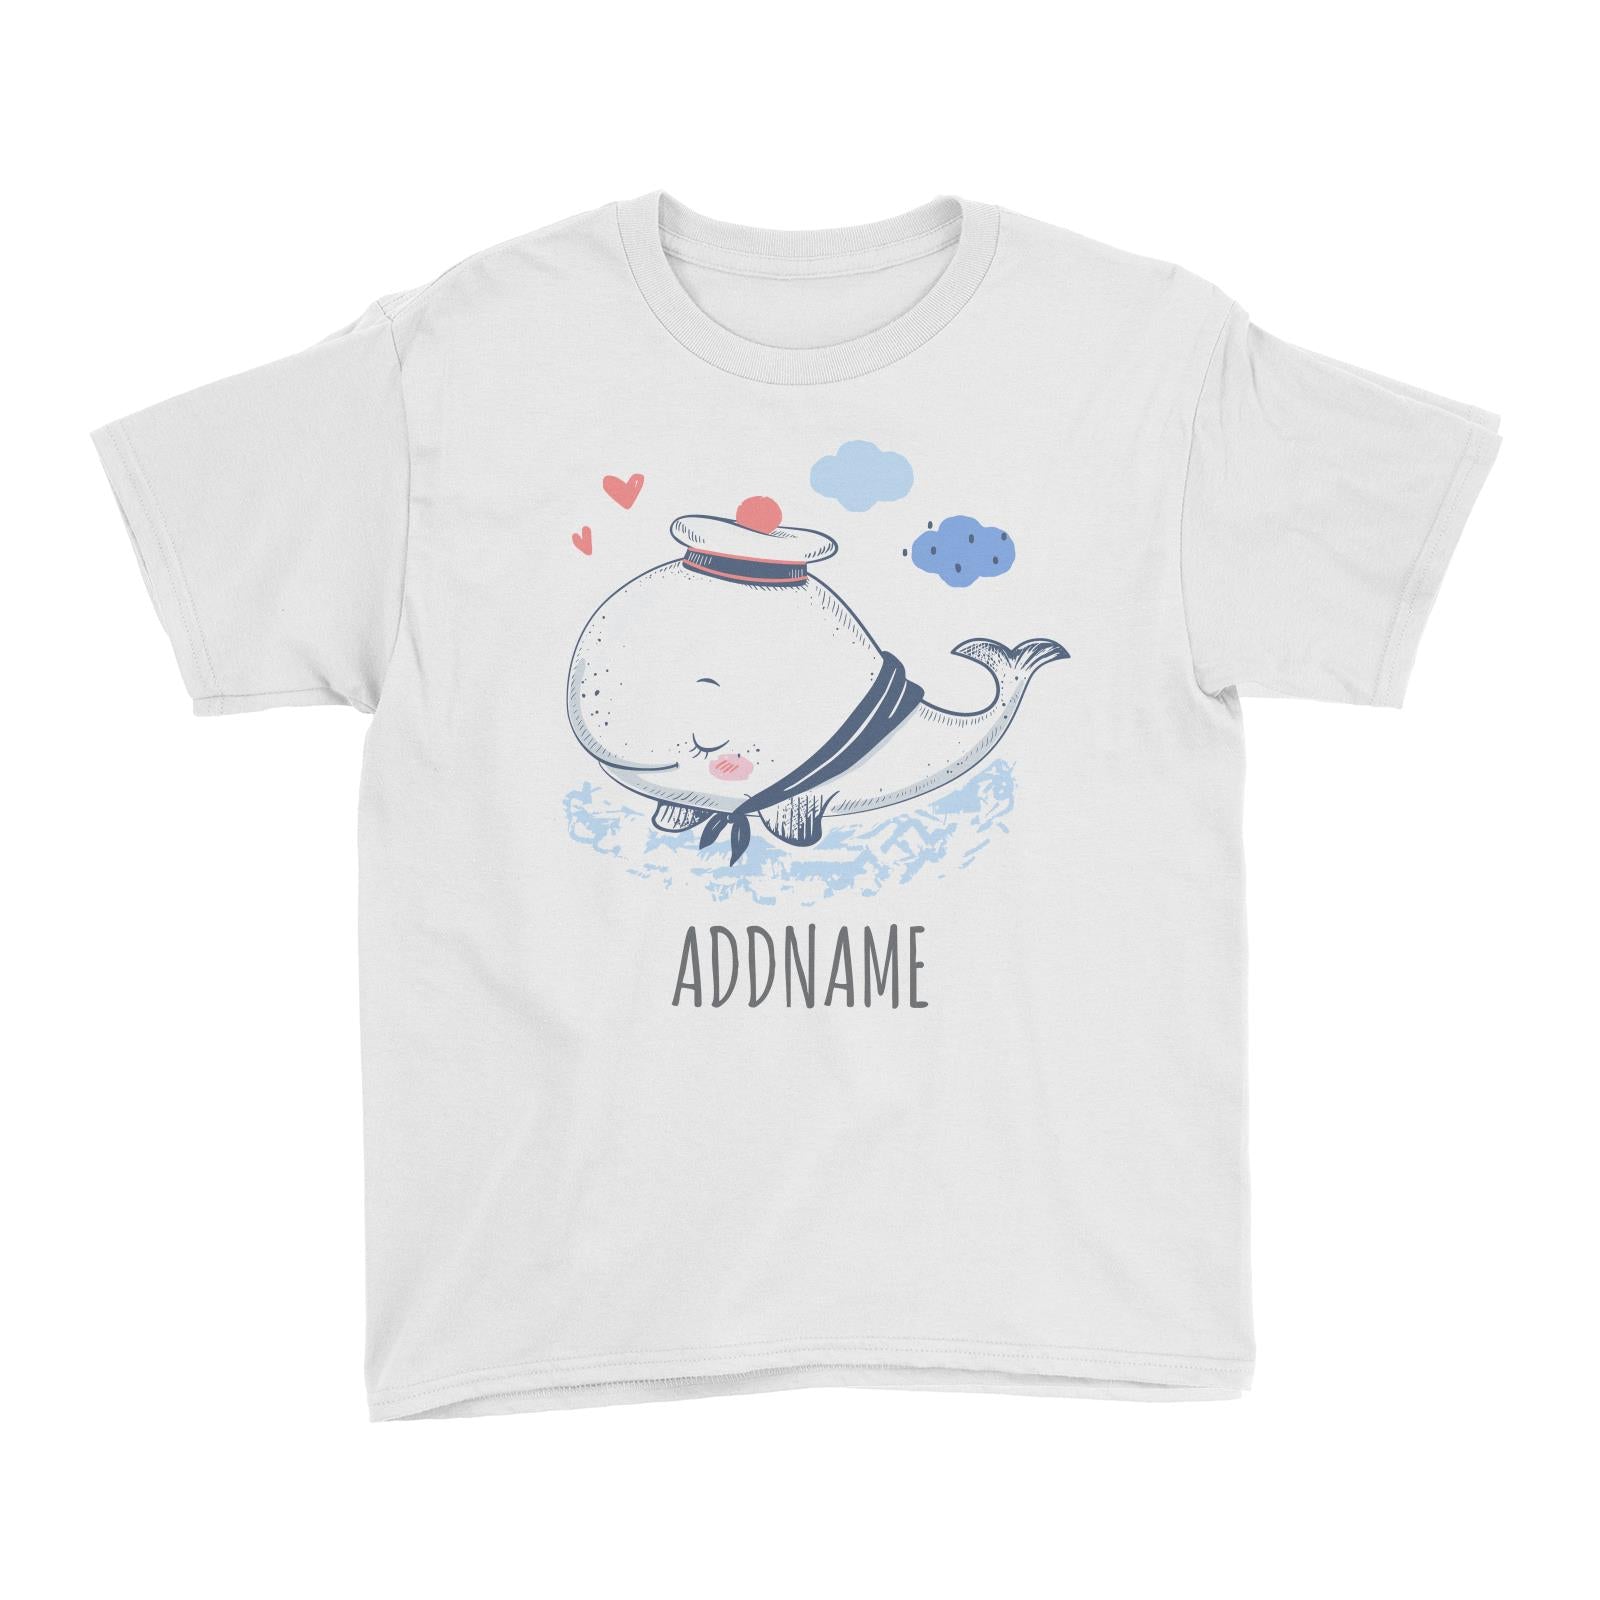 Sailor Whale White Kid's T-Shirt Personalizable Designs Cute Sweet Animal HG